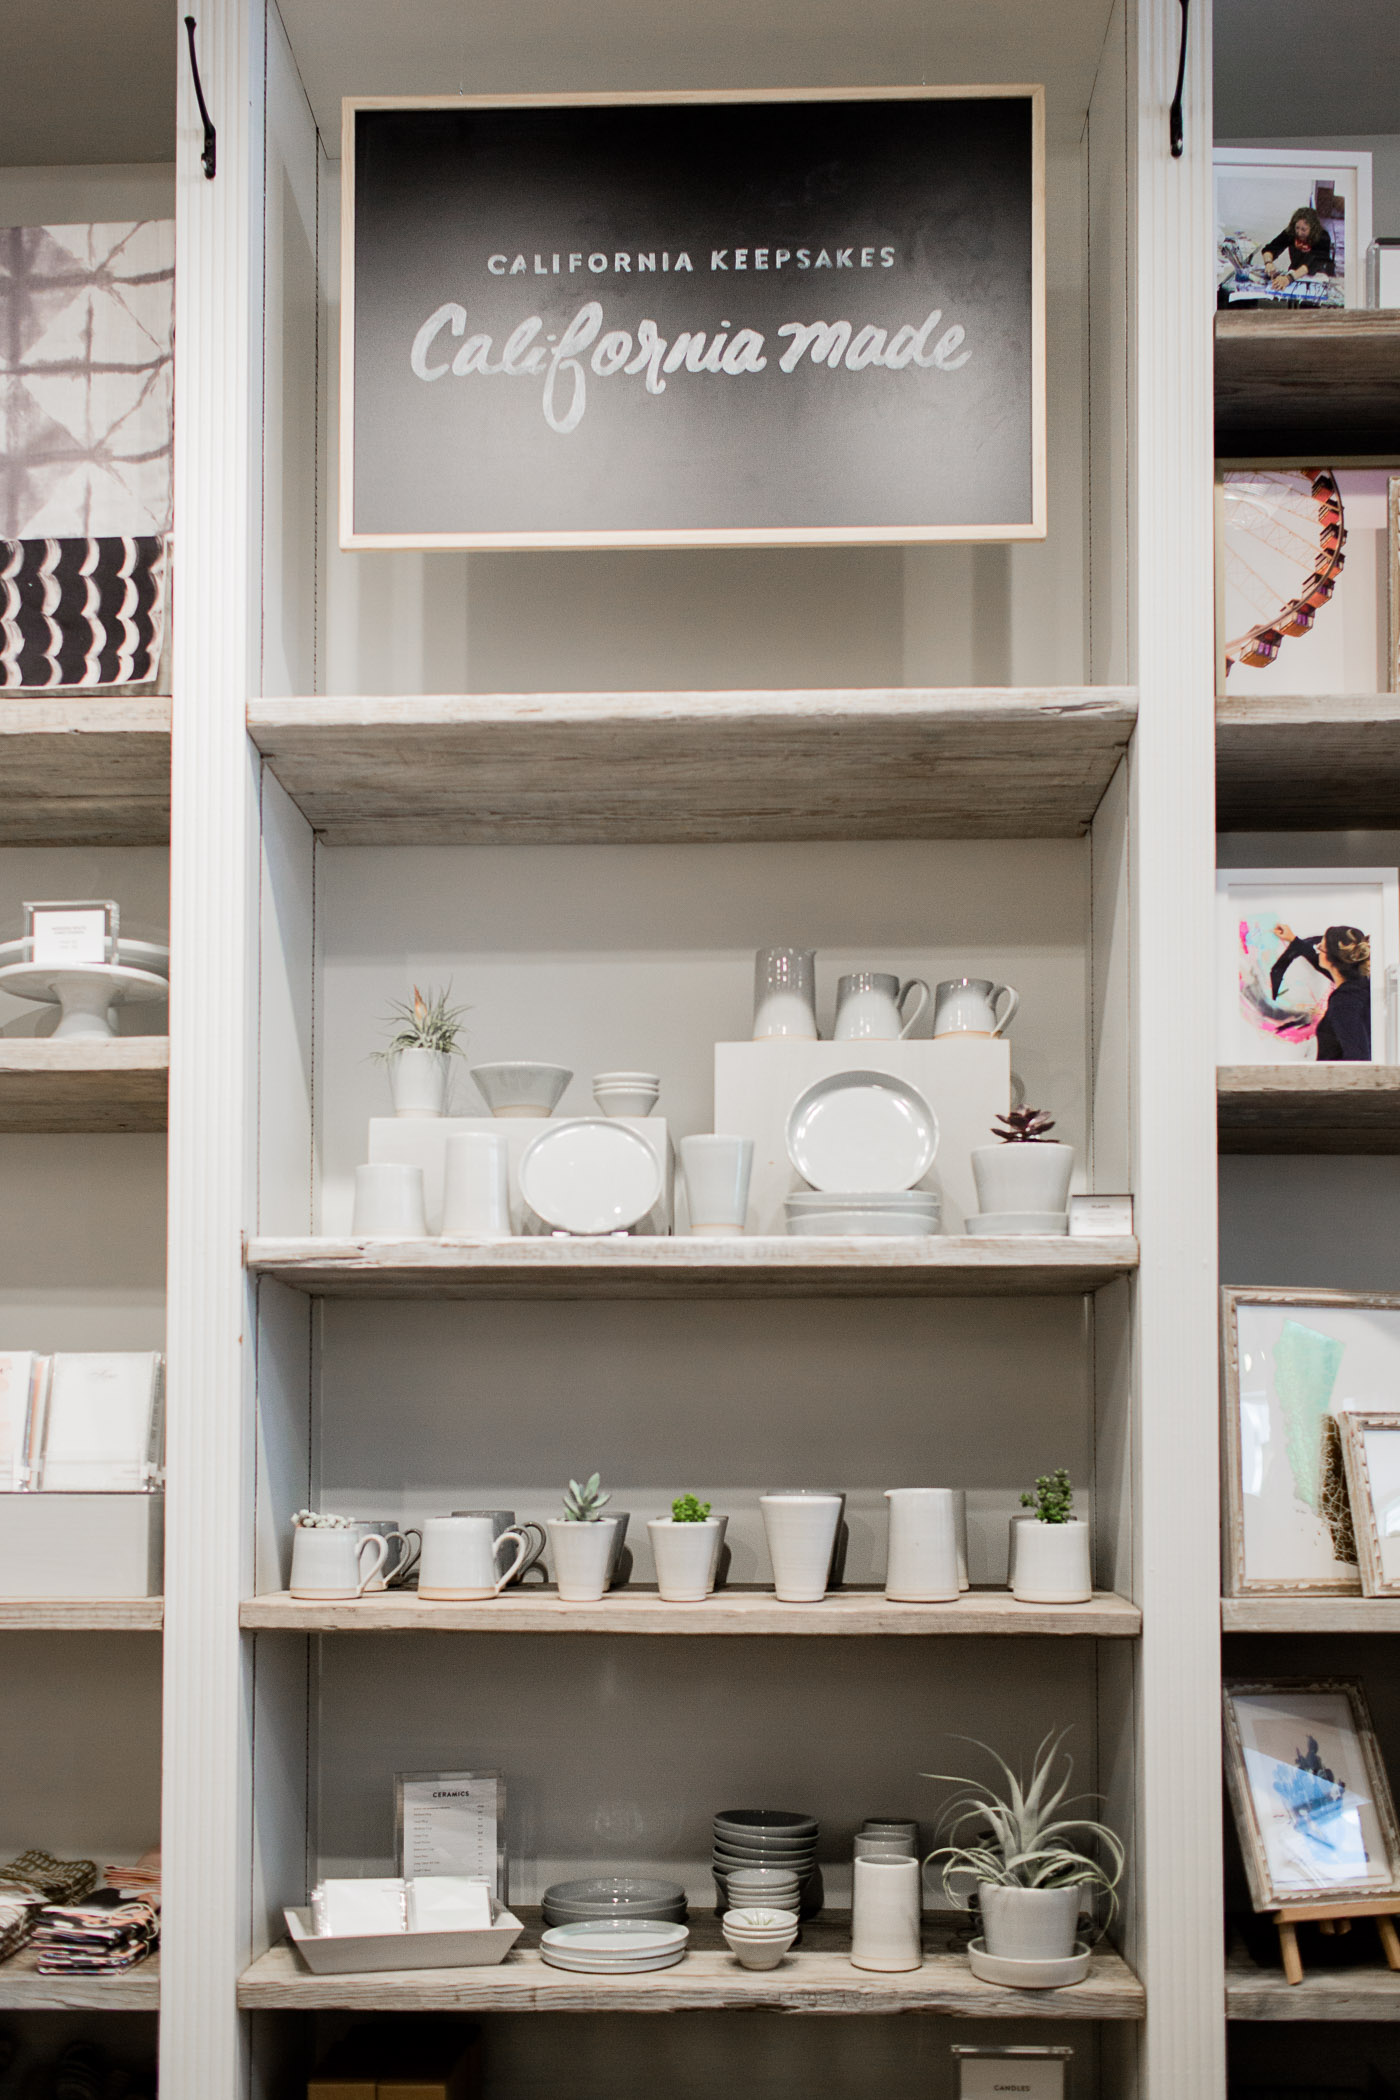 Minted Local, A Pop-Up Shop in San Francisco, California